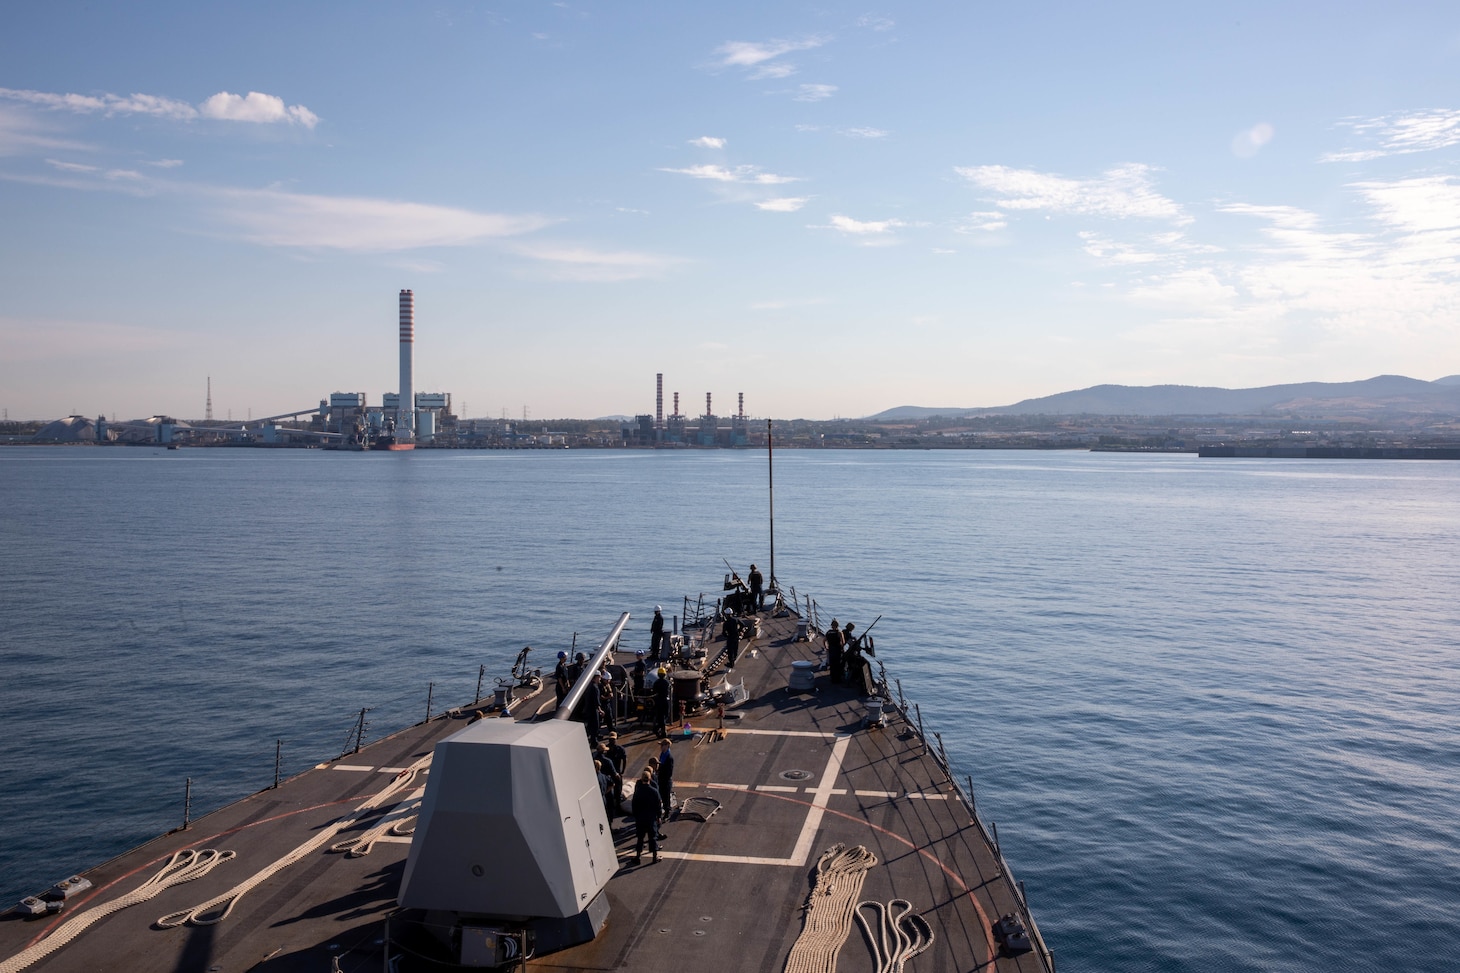 The Arleigh Burke-class guided-missile destroyer USS Bainbridge (DDG 96) arrives in Civitavecchia, Italy, for a scheduled port visit, Aug. 2, 2022. Bainbridge is on a scheduled deployment in the U.S. Naval Forces Europe area of operations, employed by U.S. Sixth Fleet to defend U.S., allied and partner interests.